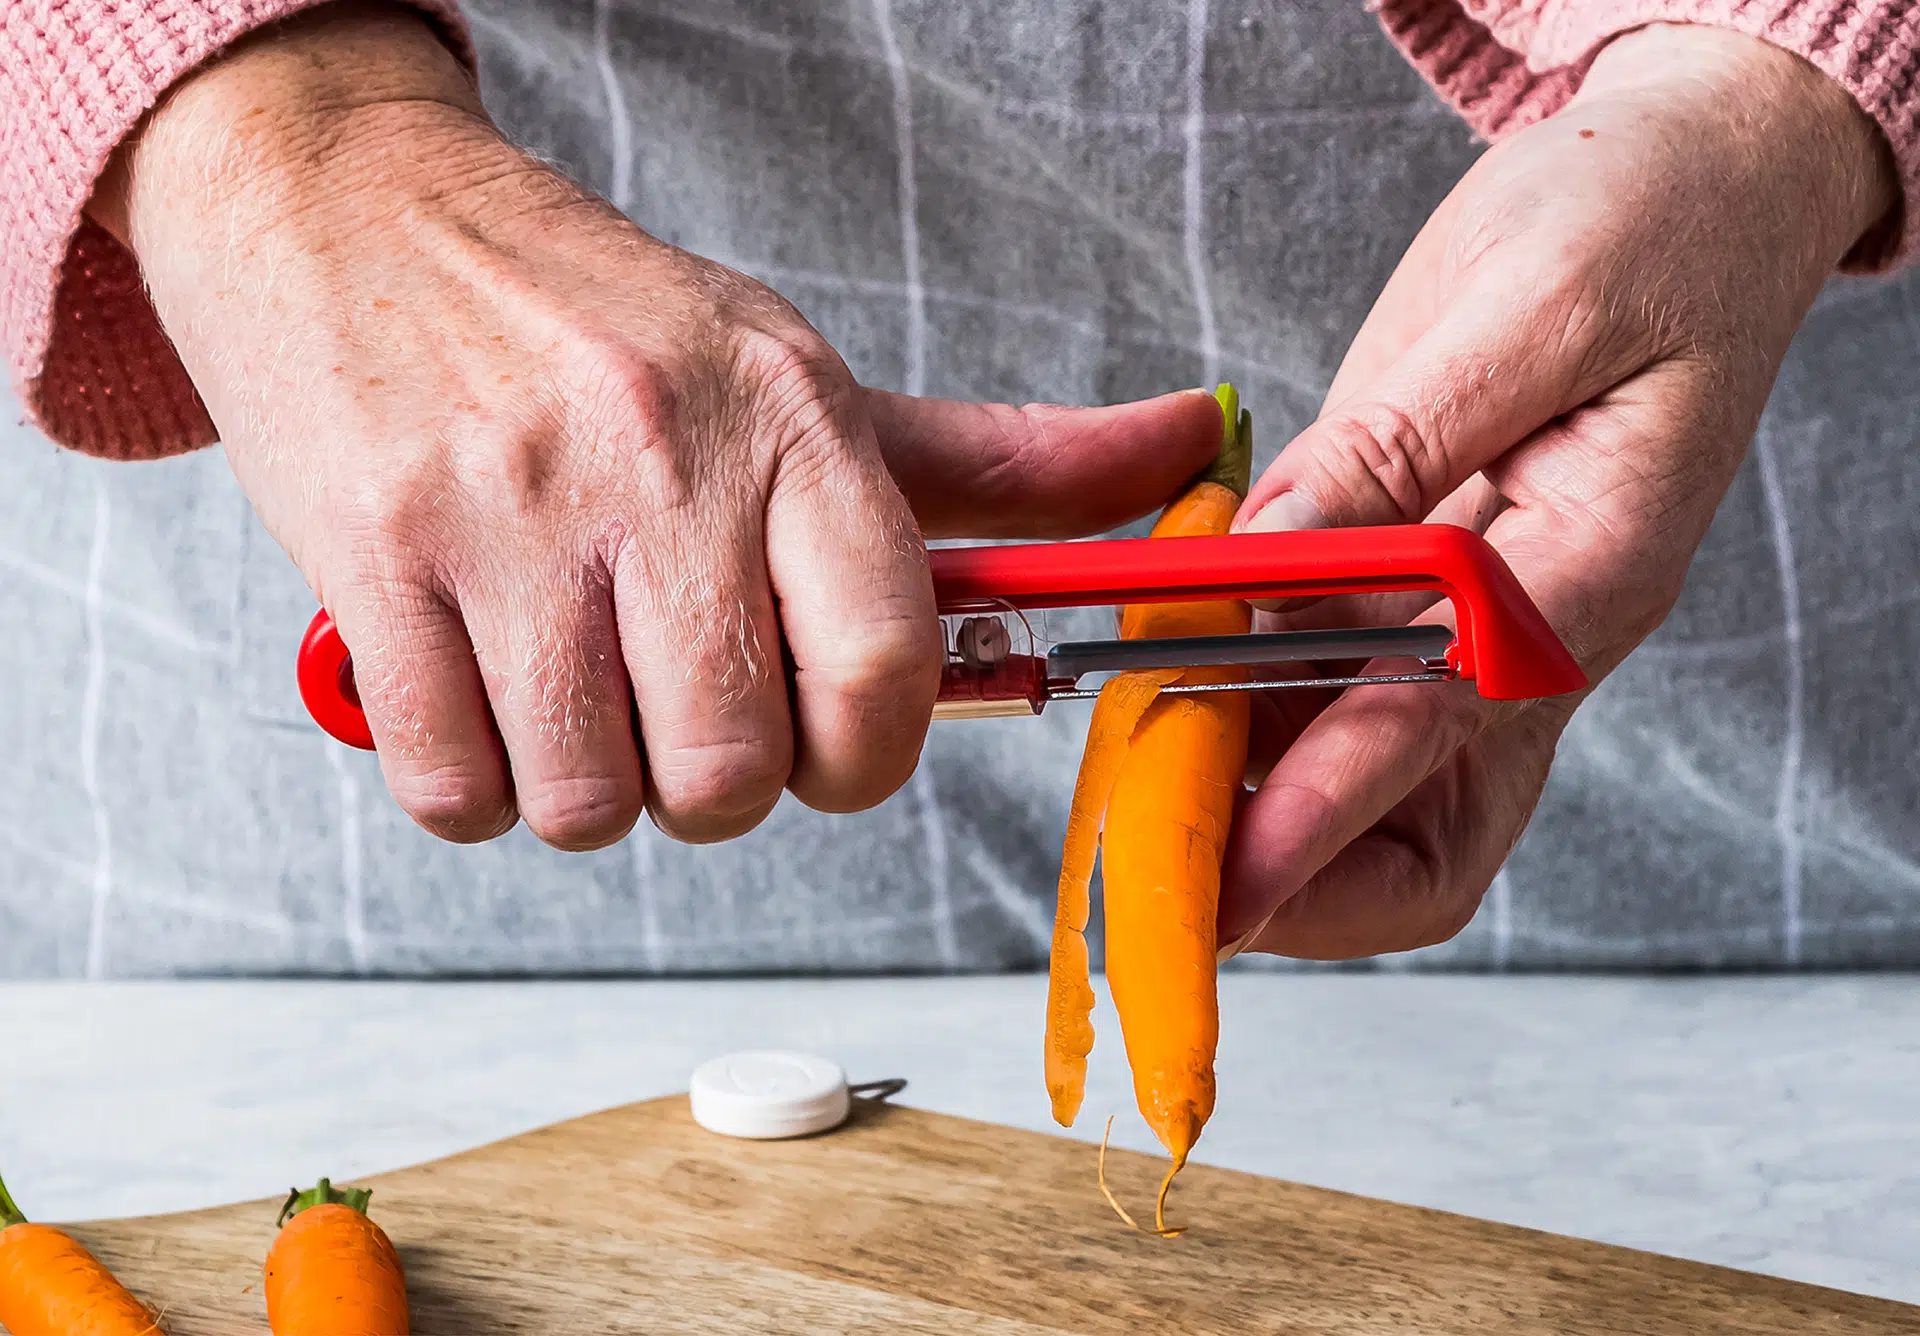 6 Clever Ways to Use a Vegetable Peeler